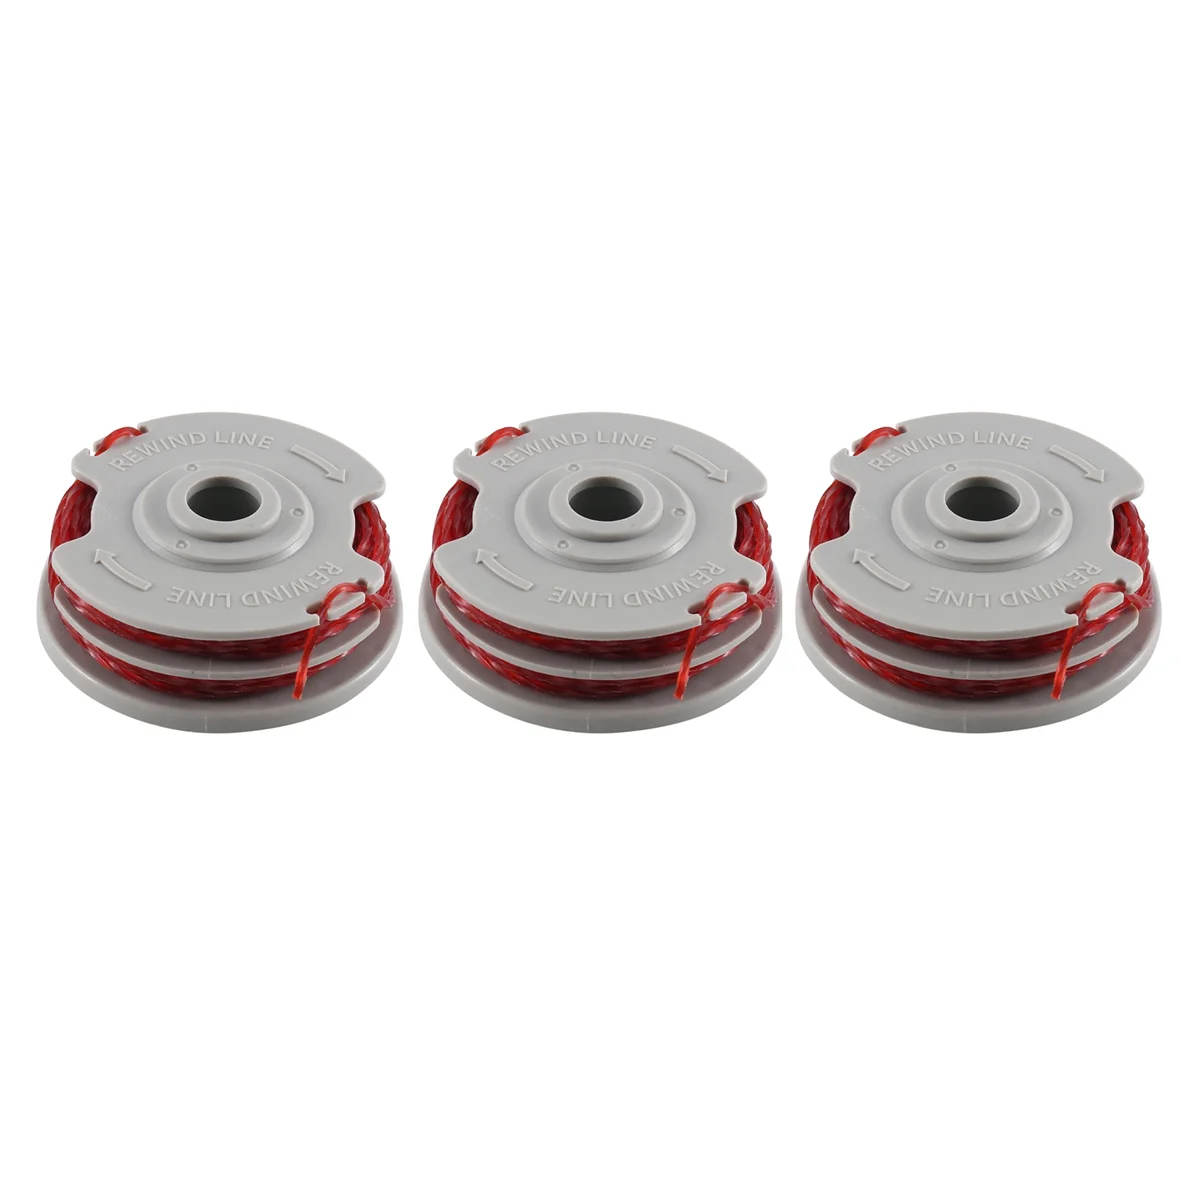 

3 Pack Replacement FLYMO FLY021 Replacement Spool Mowing Head for Flymo Lawn Mower